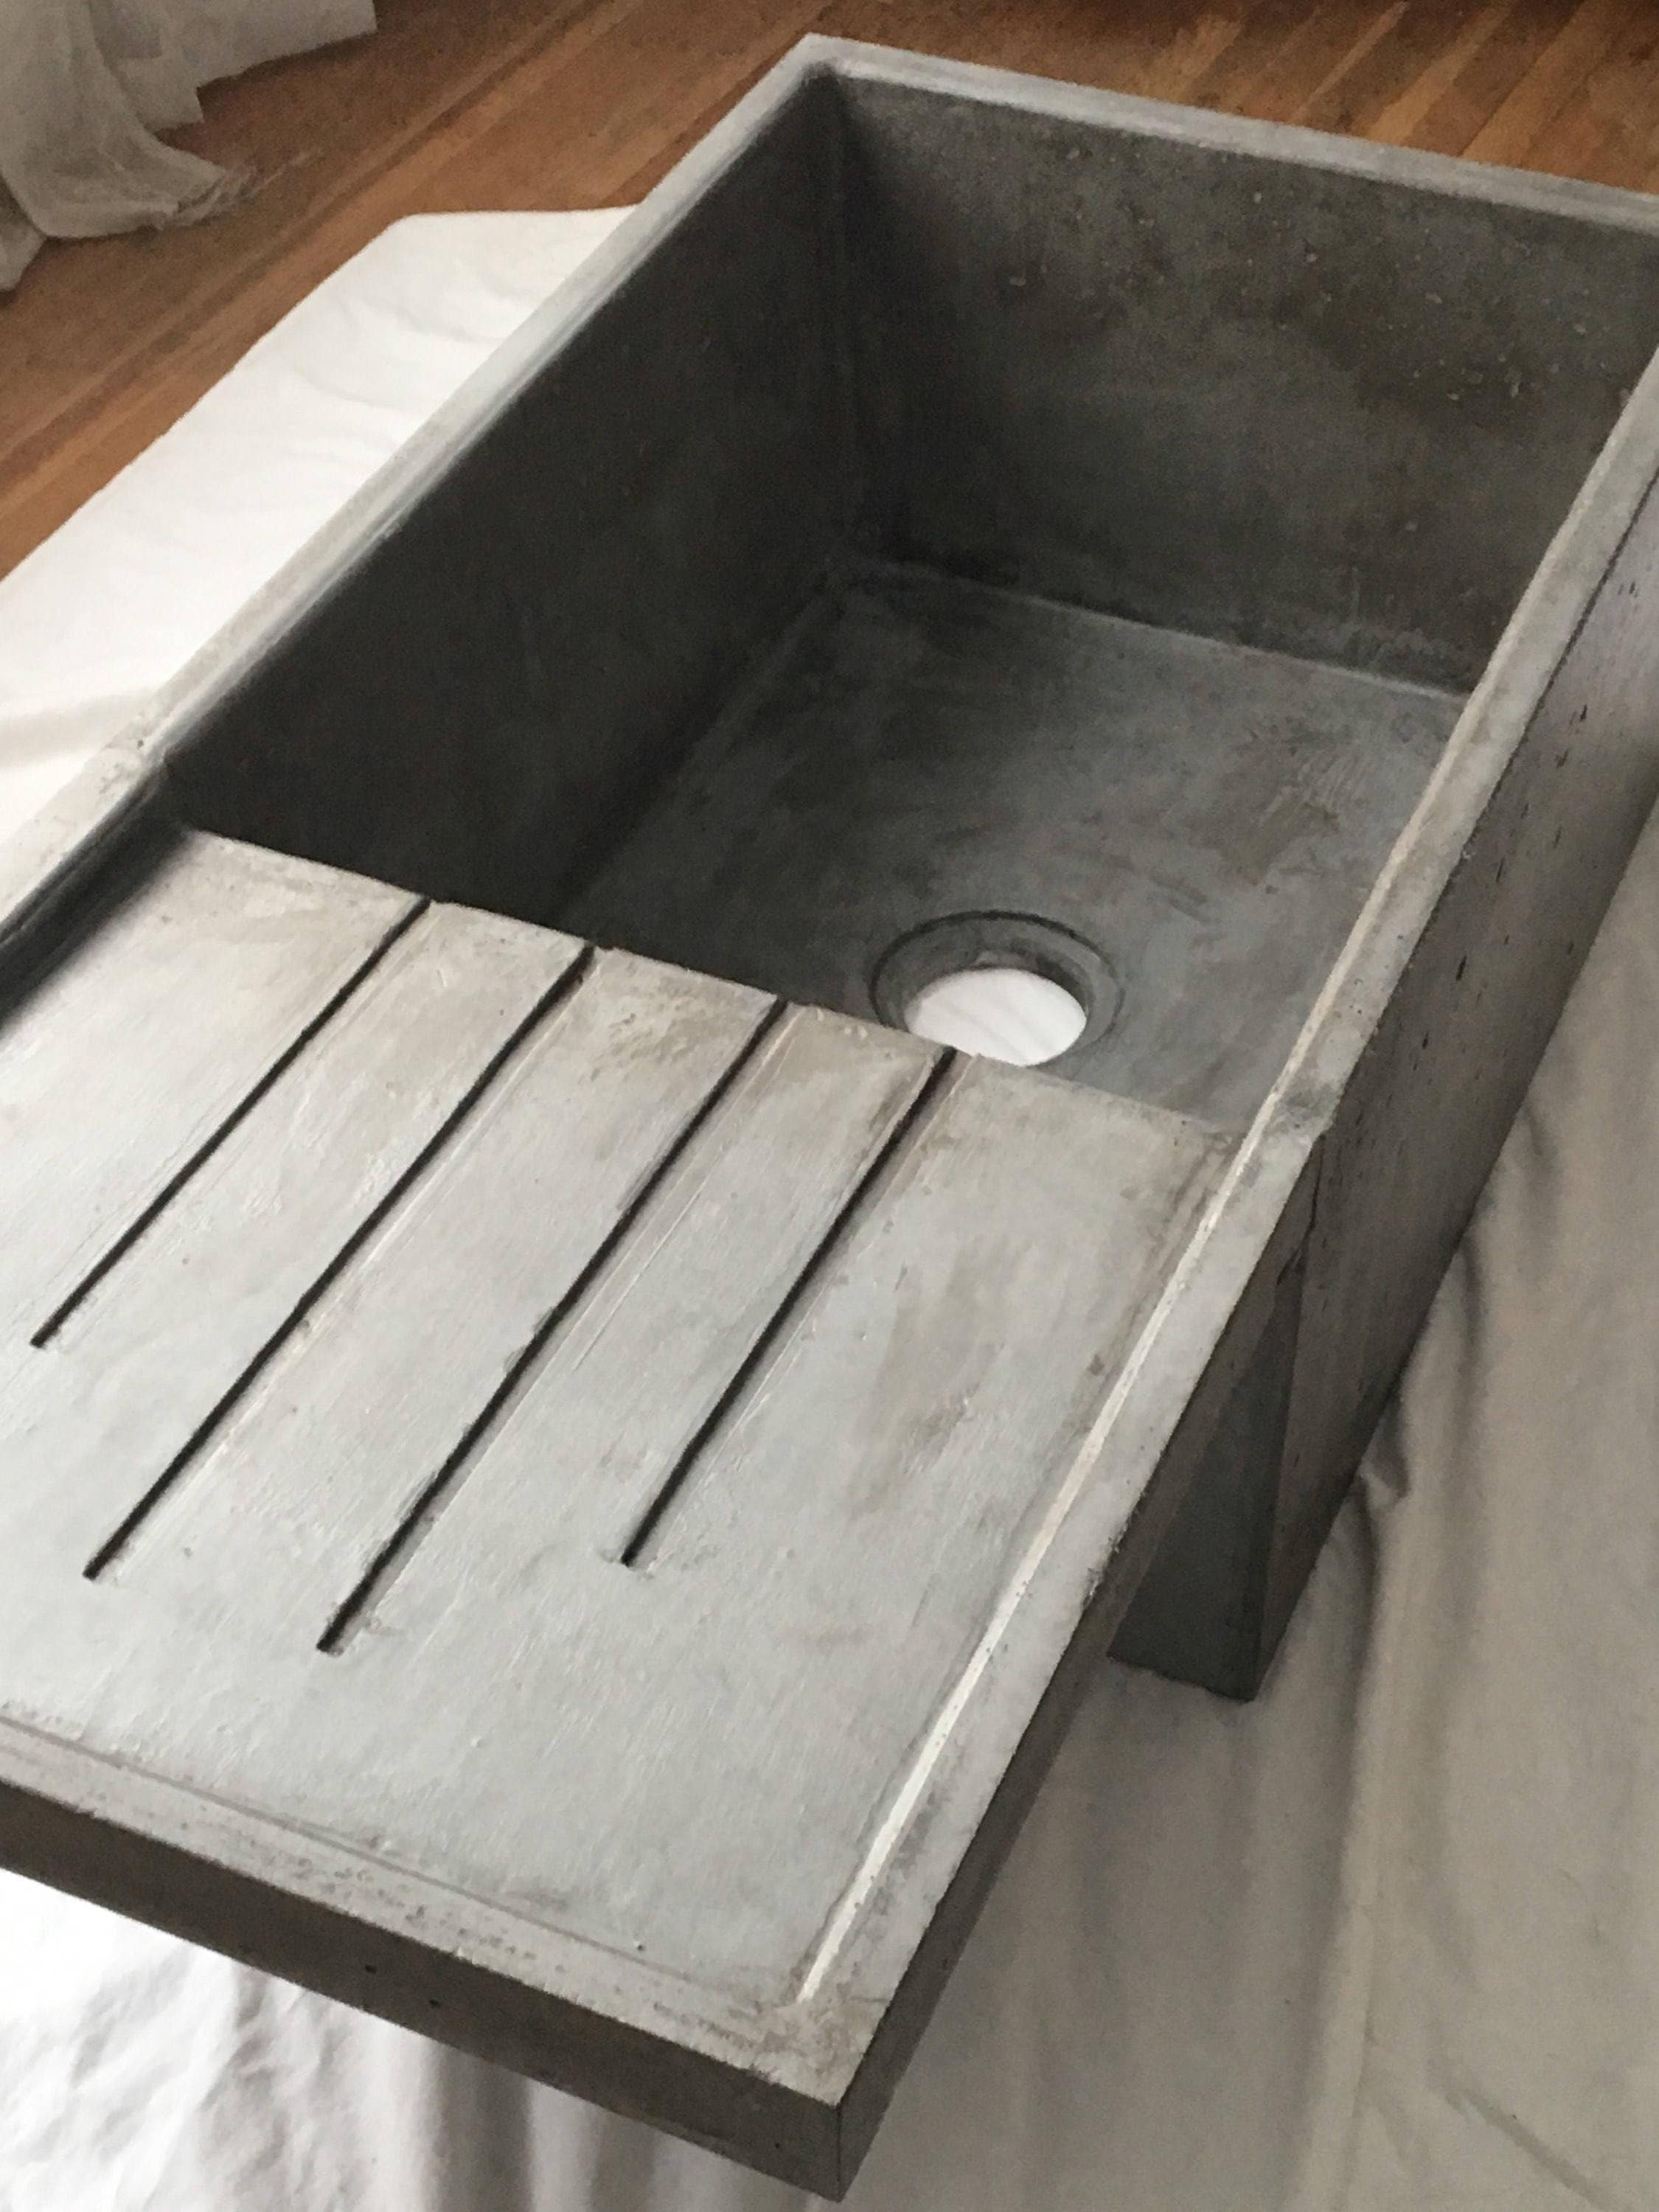 Concrete Farmhouse Sink with Attached Drainboard | Etsy